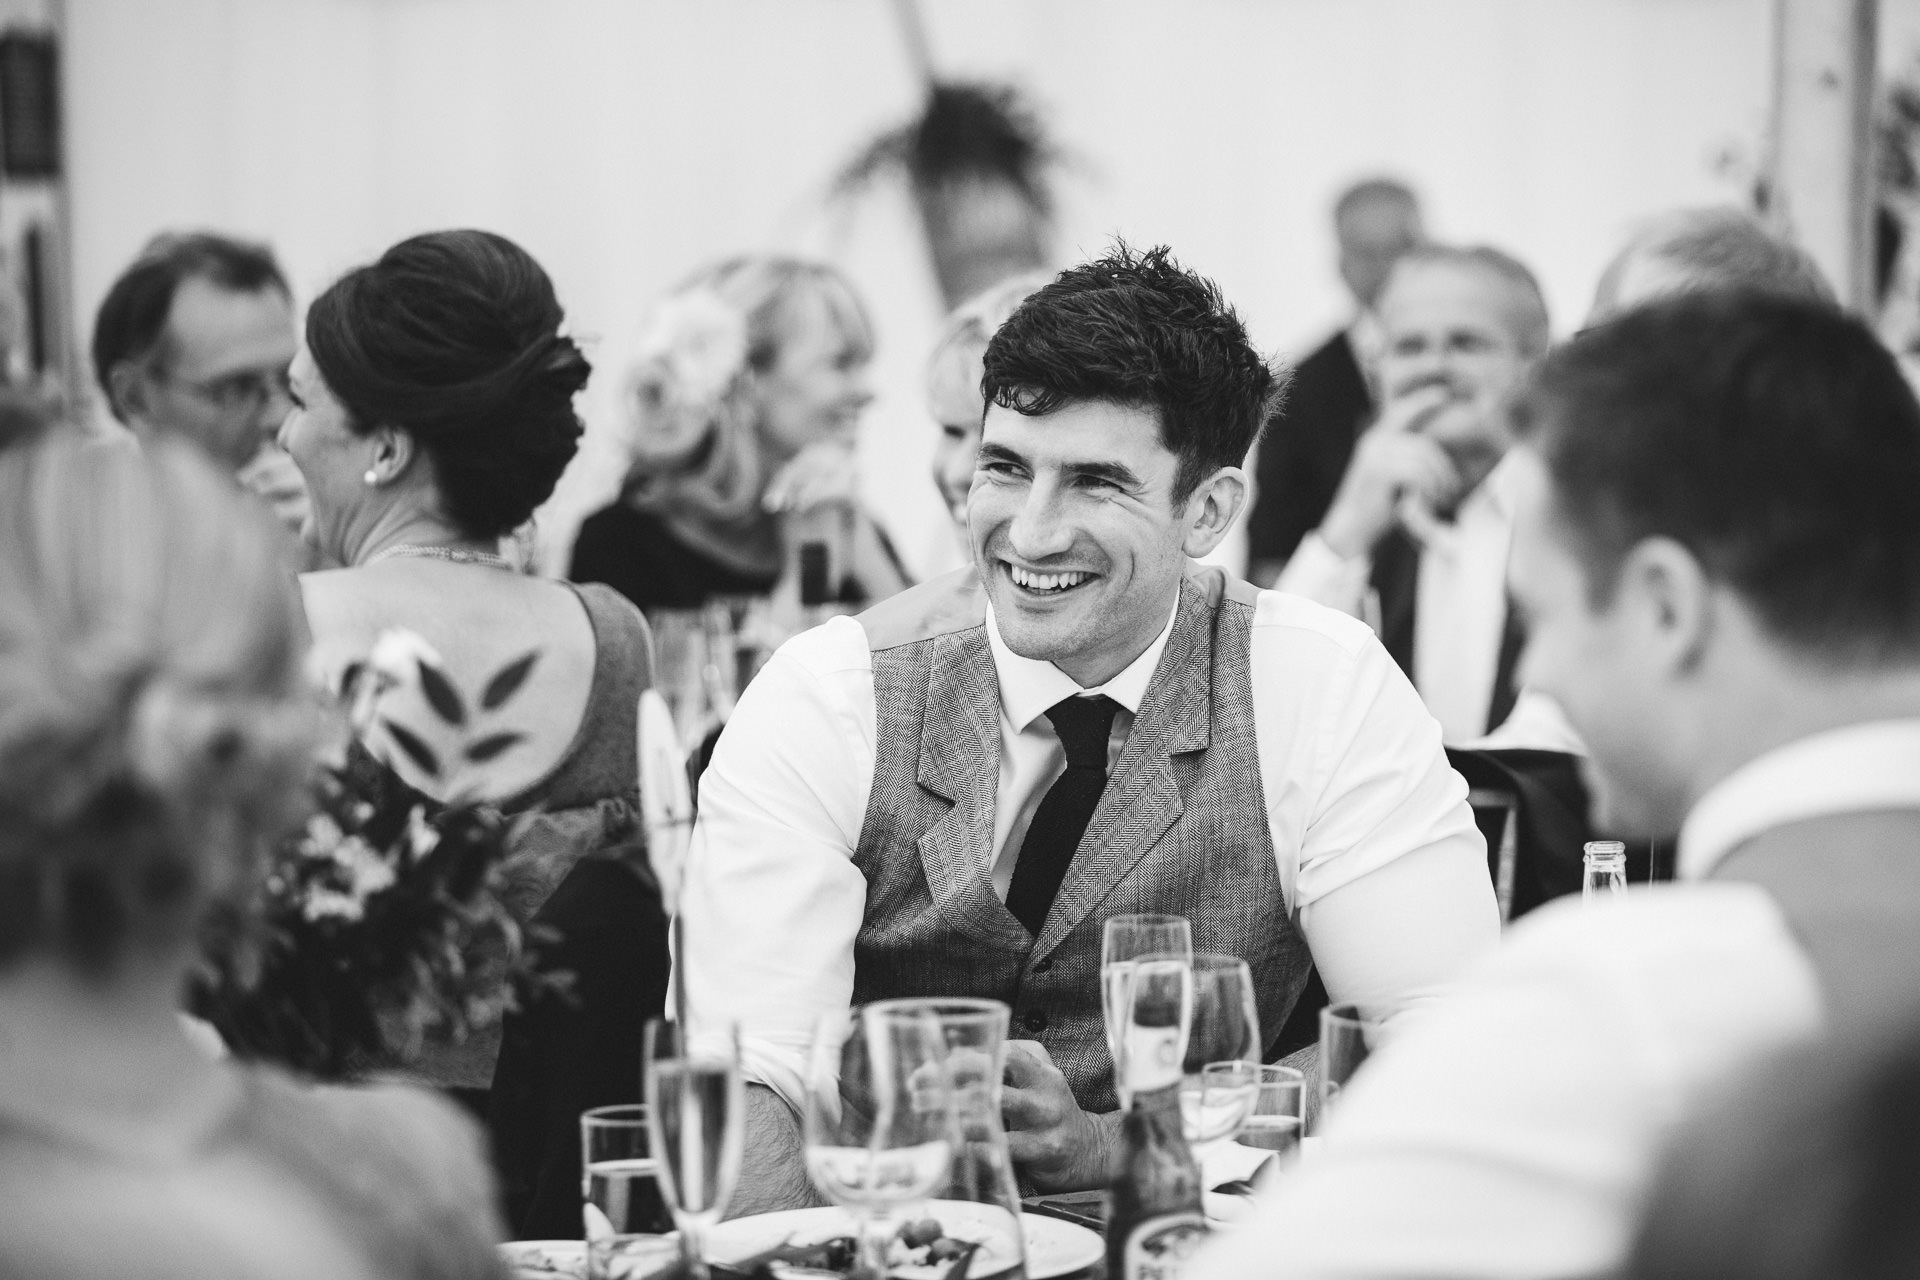 Guests laughing at wedding speeches inside a marquee